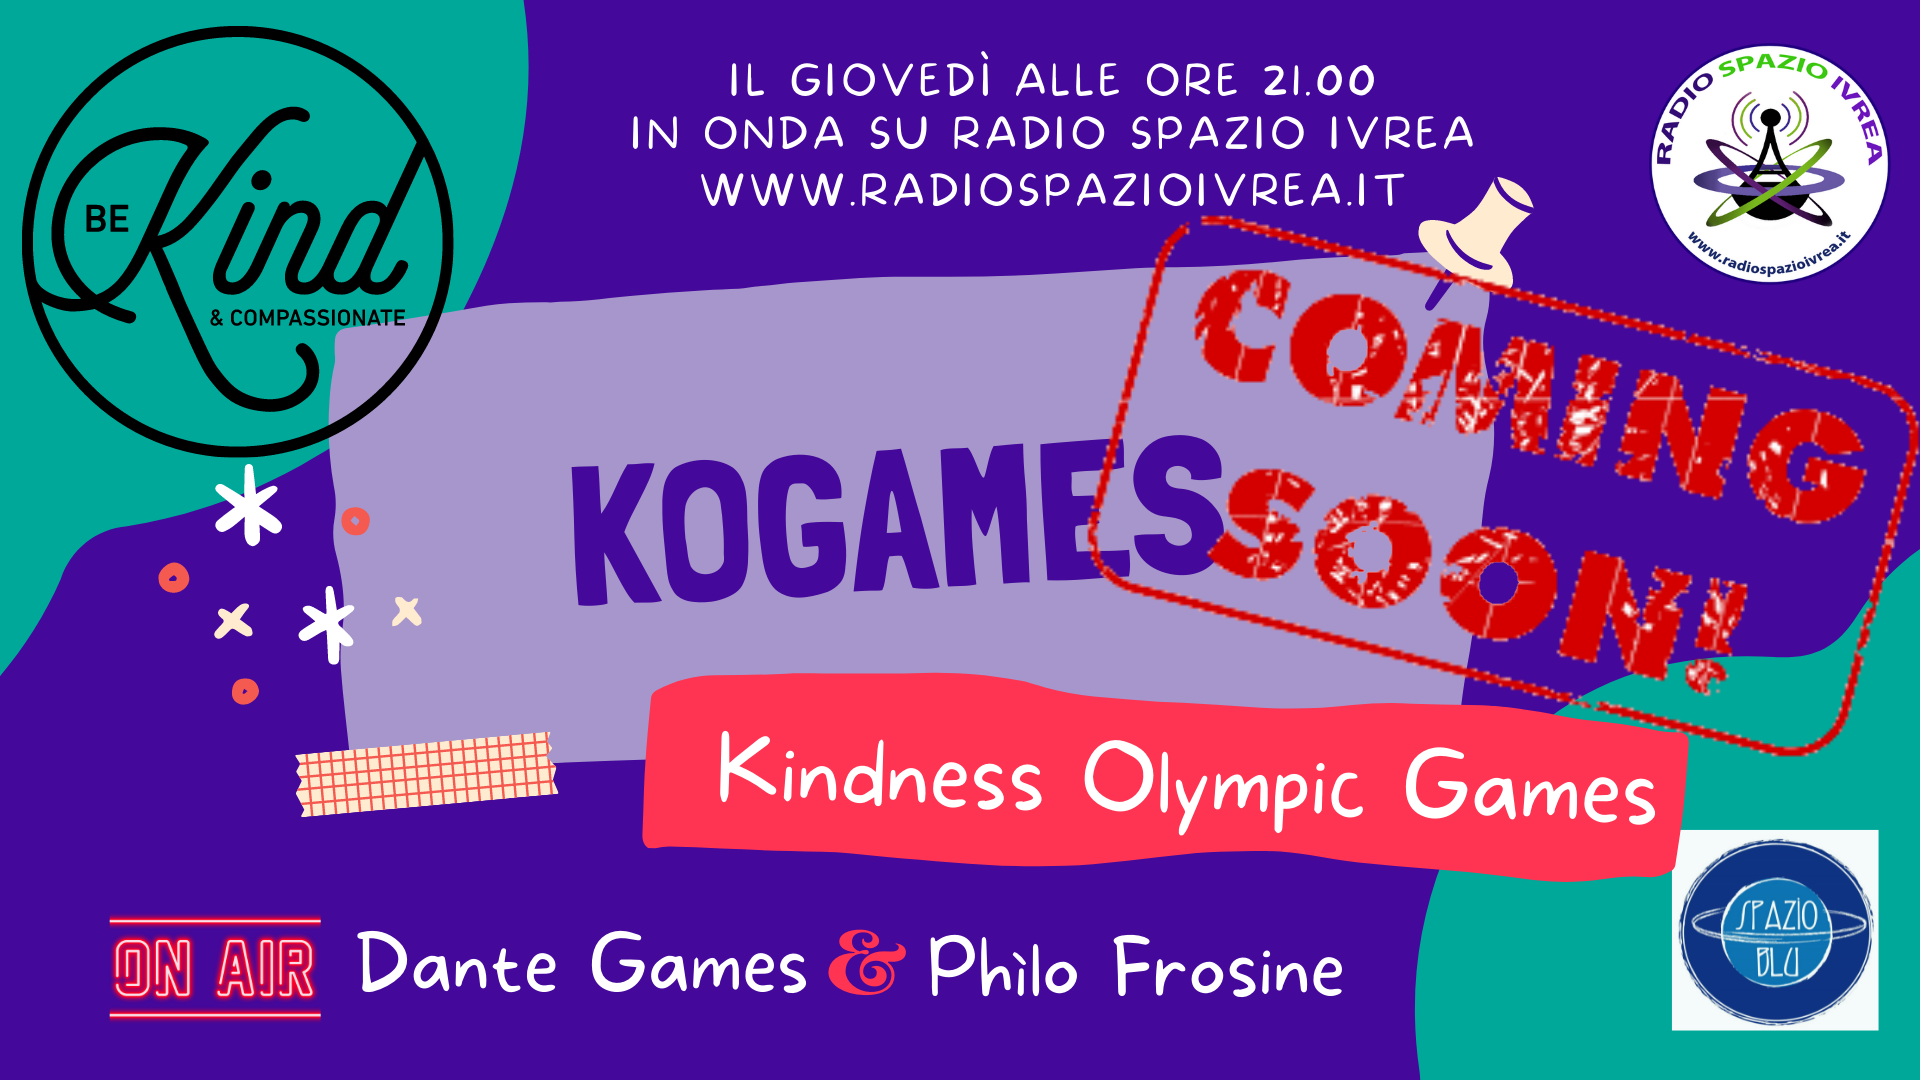 KIDNESS OLYMPIC GAMES HOME PAGE